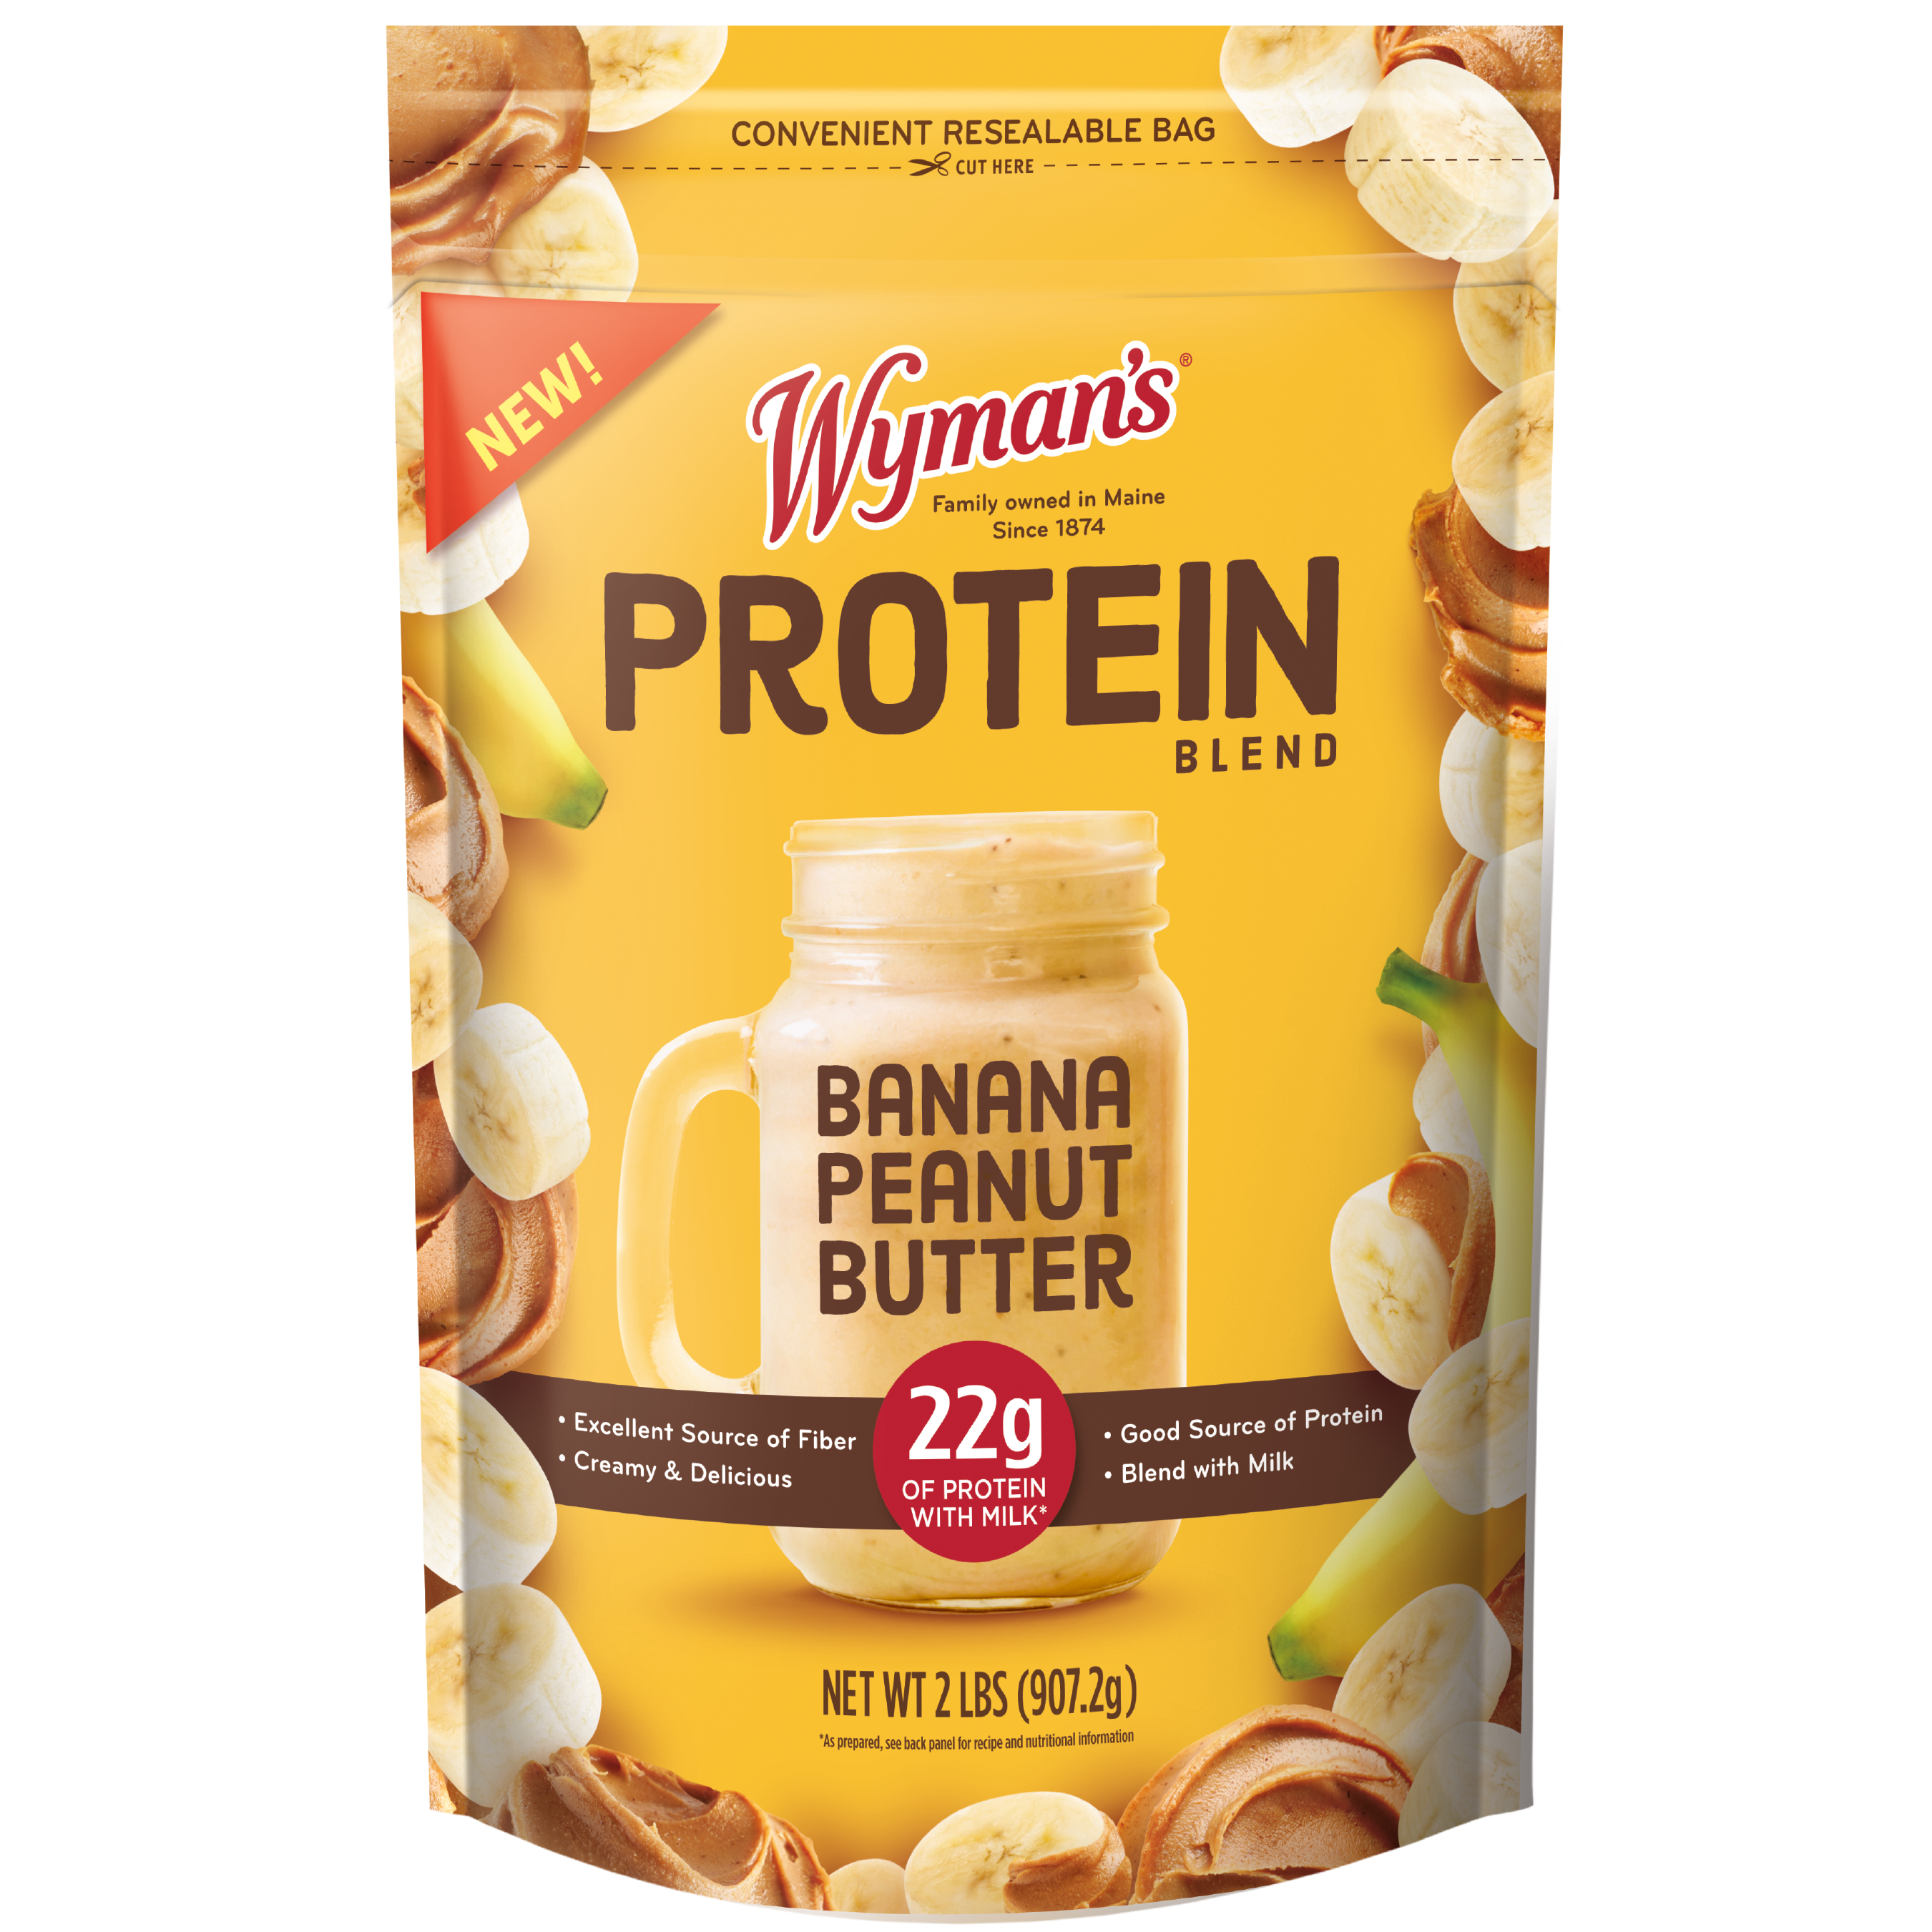 Wyman's Protein Blend - Banana Peanut Butter Package Front